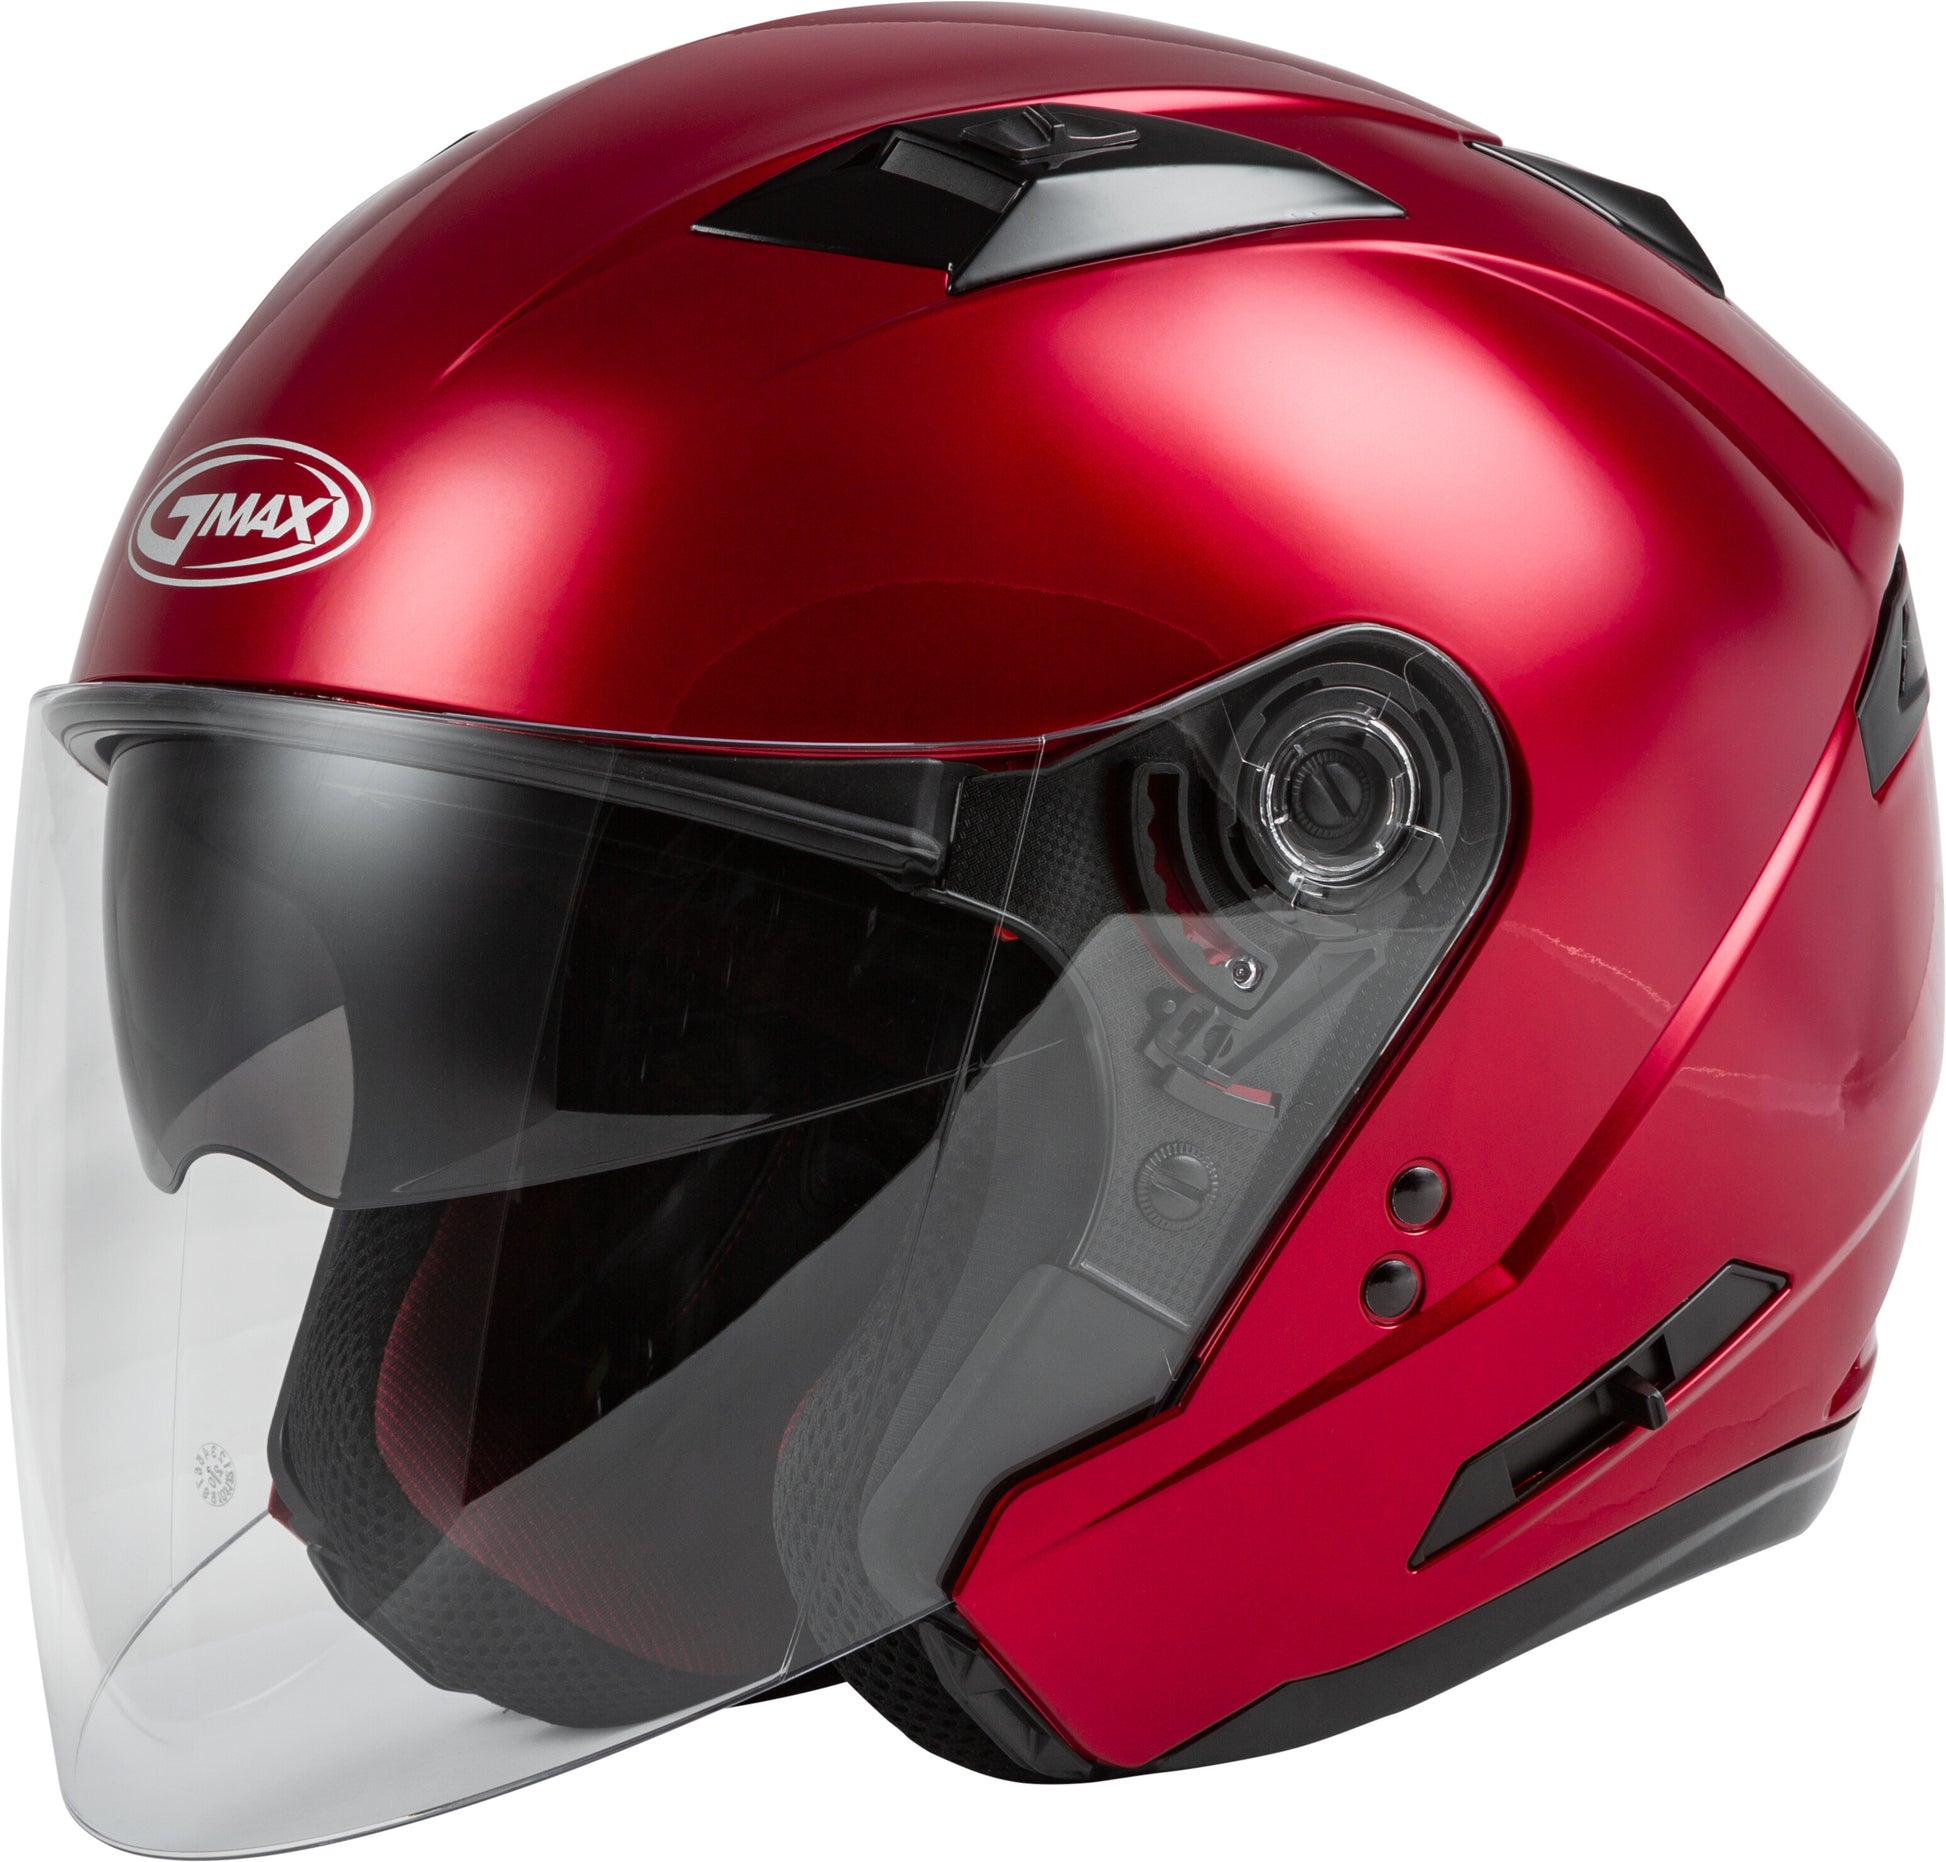 Gmax 72-4858 OF-77 Open-Face Helmet Candy Red